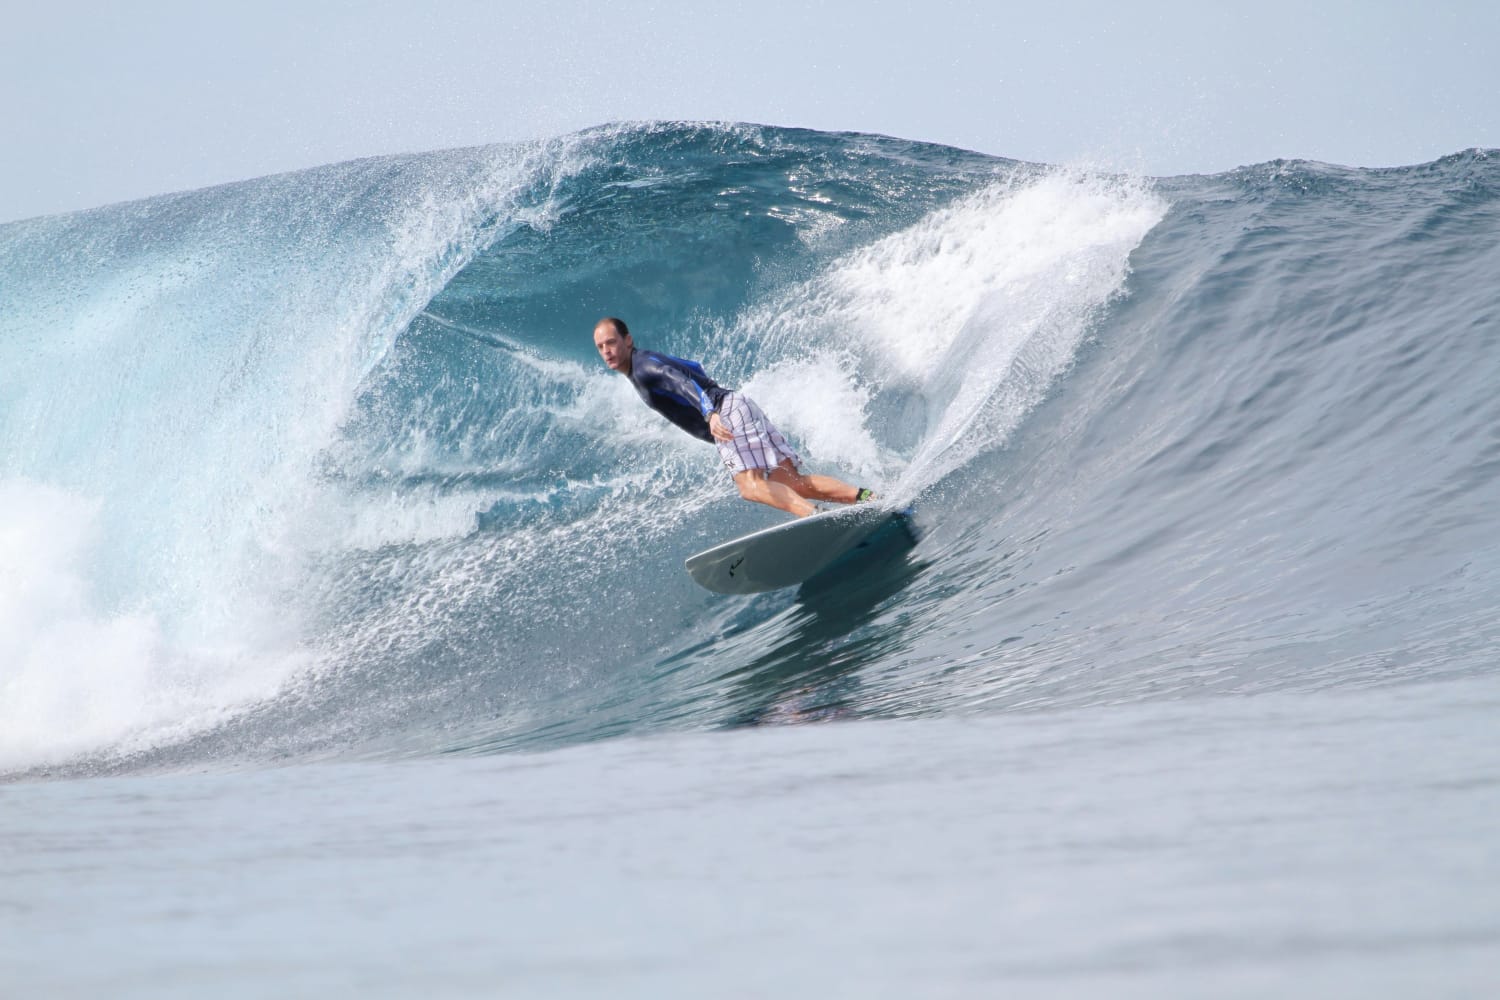 found this pic of my dad surfing this gem in indonesia